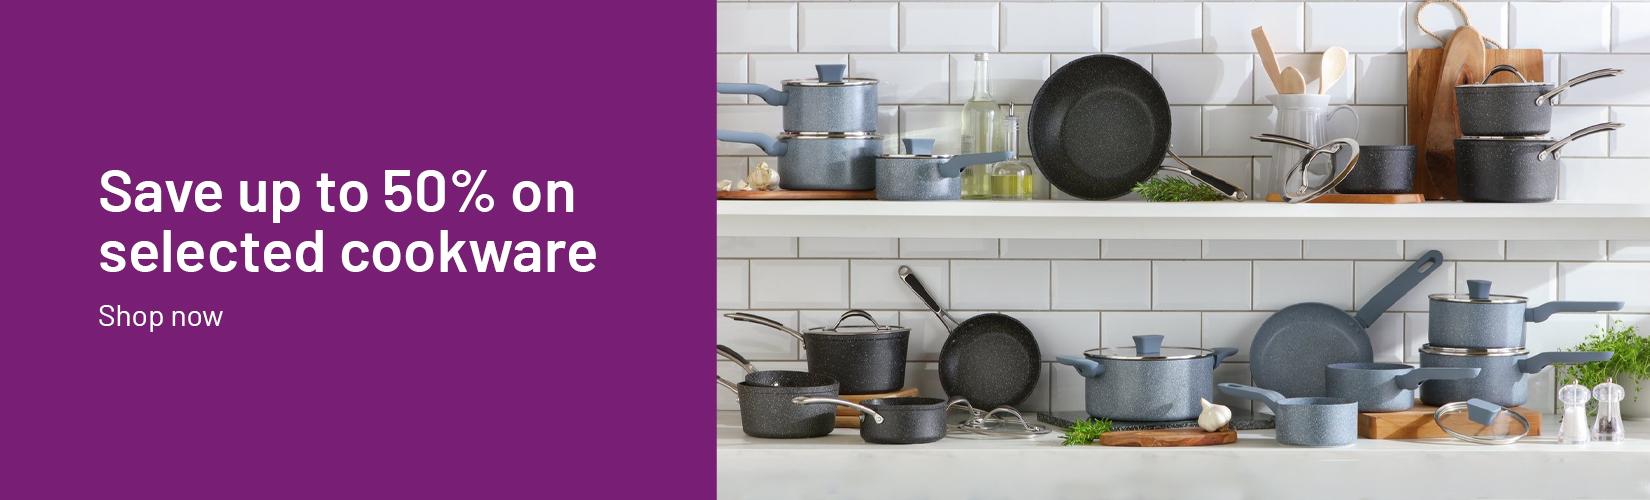 Save up to X on selected cookware.